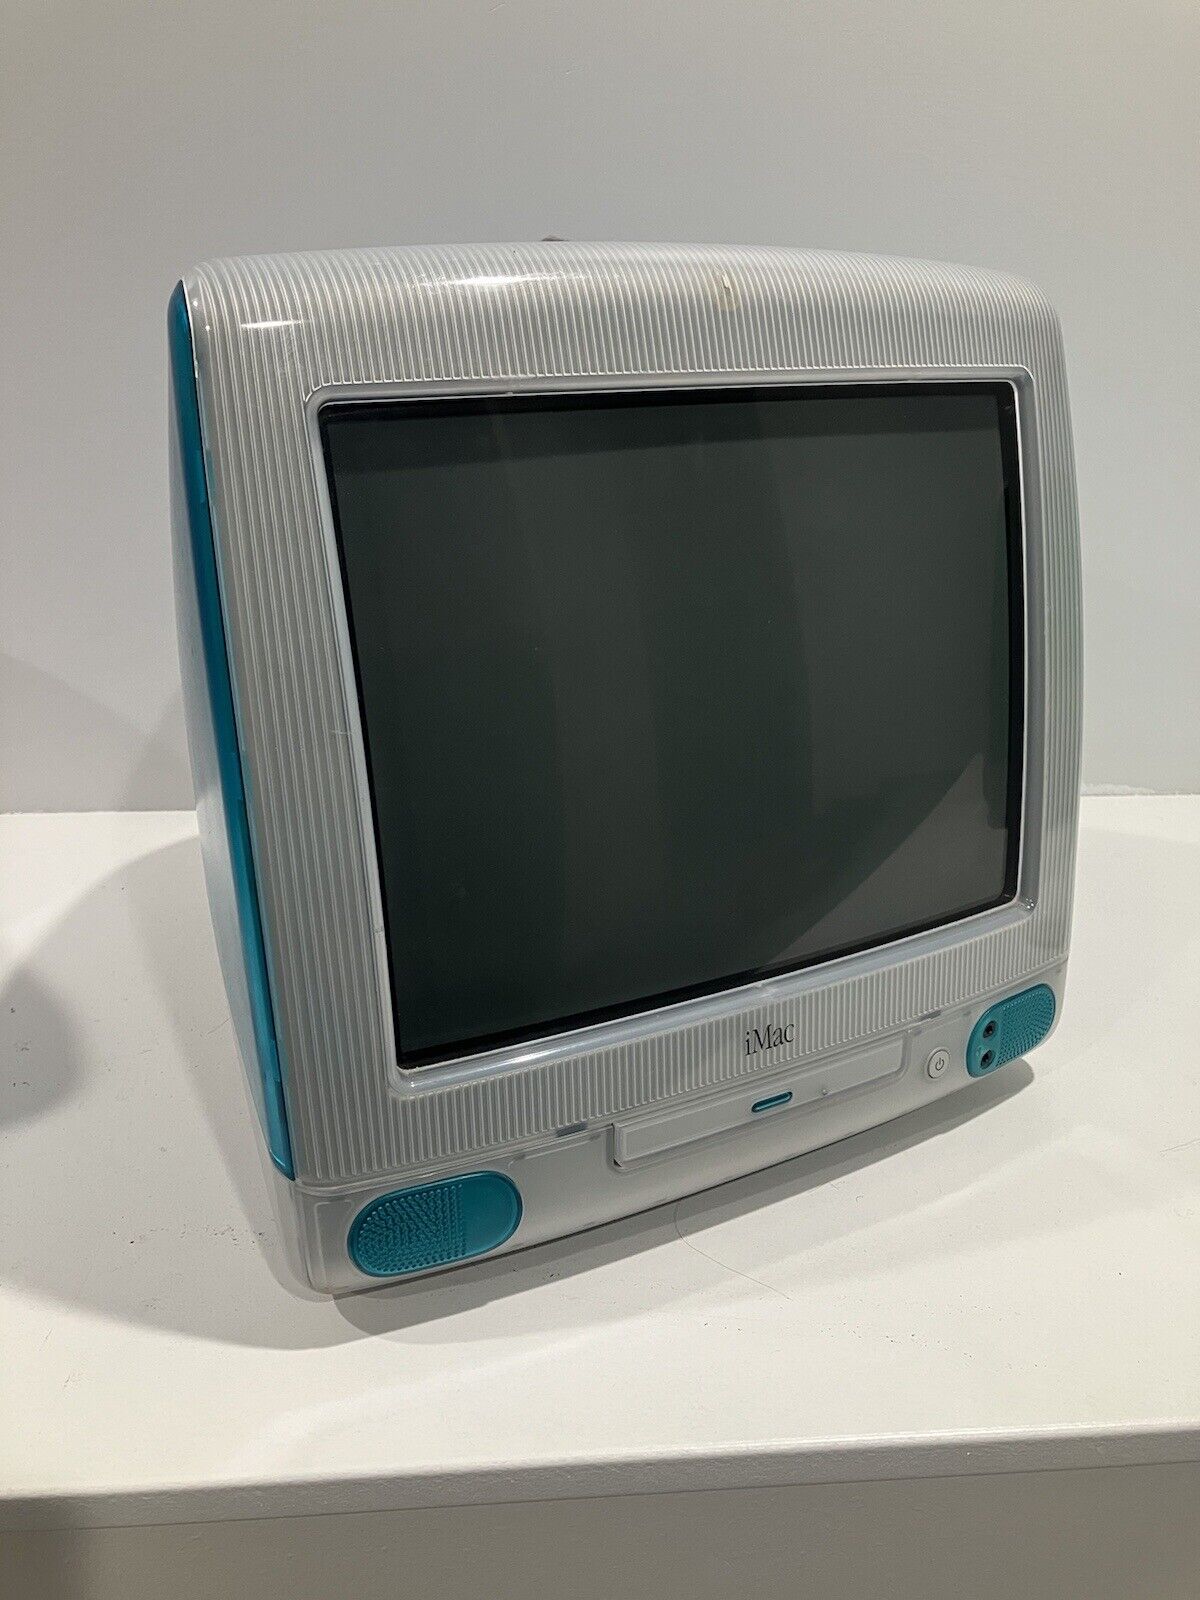 Apple iMac G3 Blueberry 333 MHz Early 1999 - Working Condition